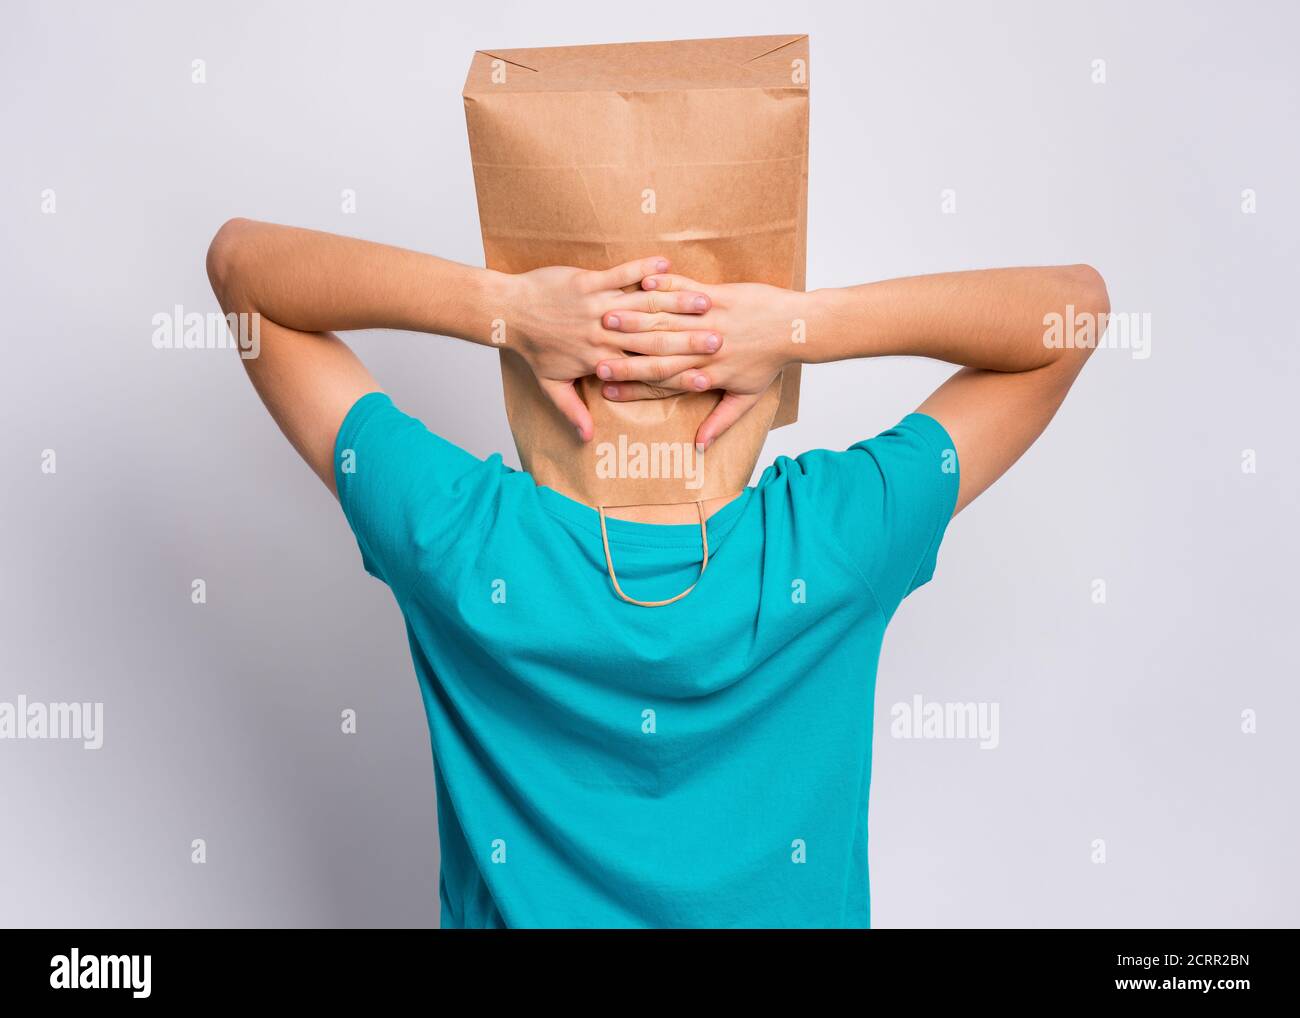 Portrait of teen boy - back view, with paper bag over head taking rest, on gray background. Time to relax. Child holding hands behind his head having Stock Photo